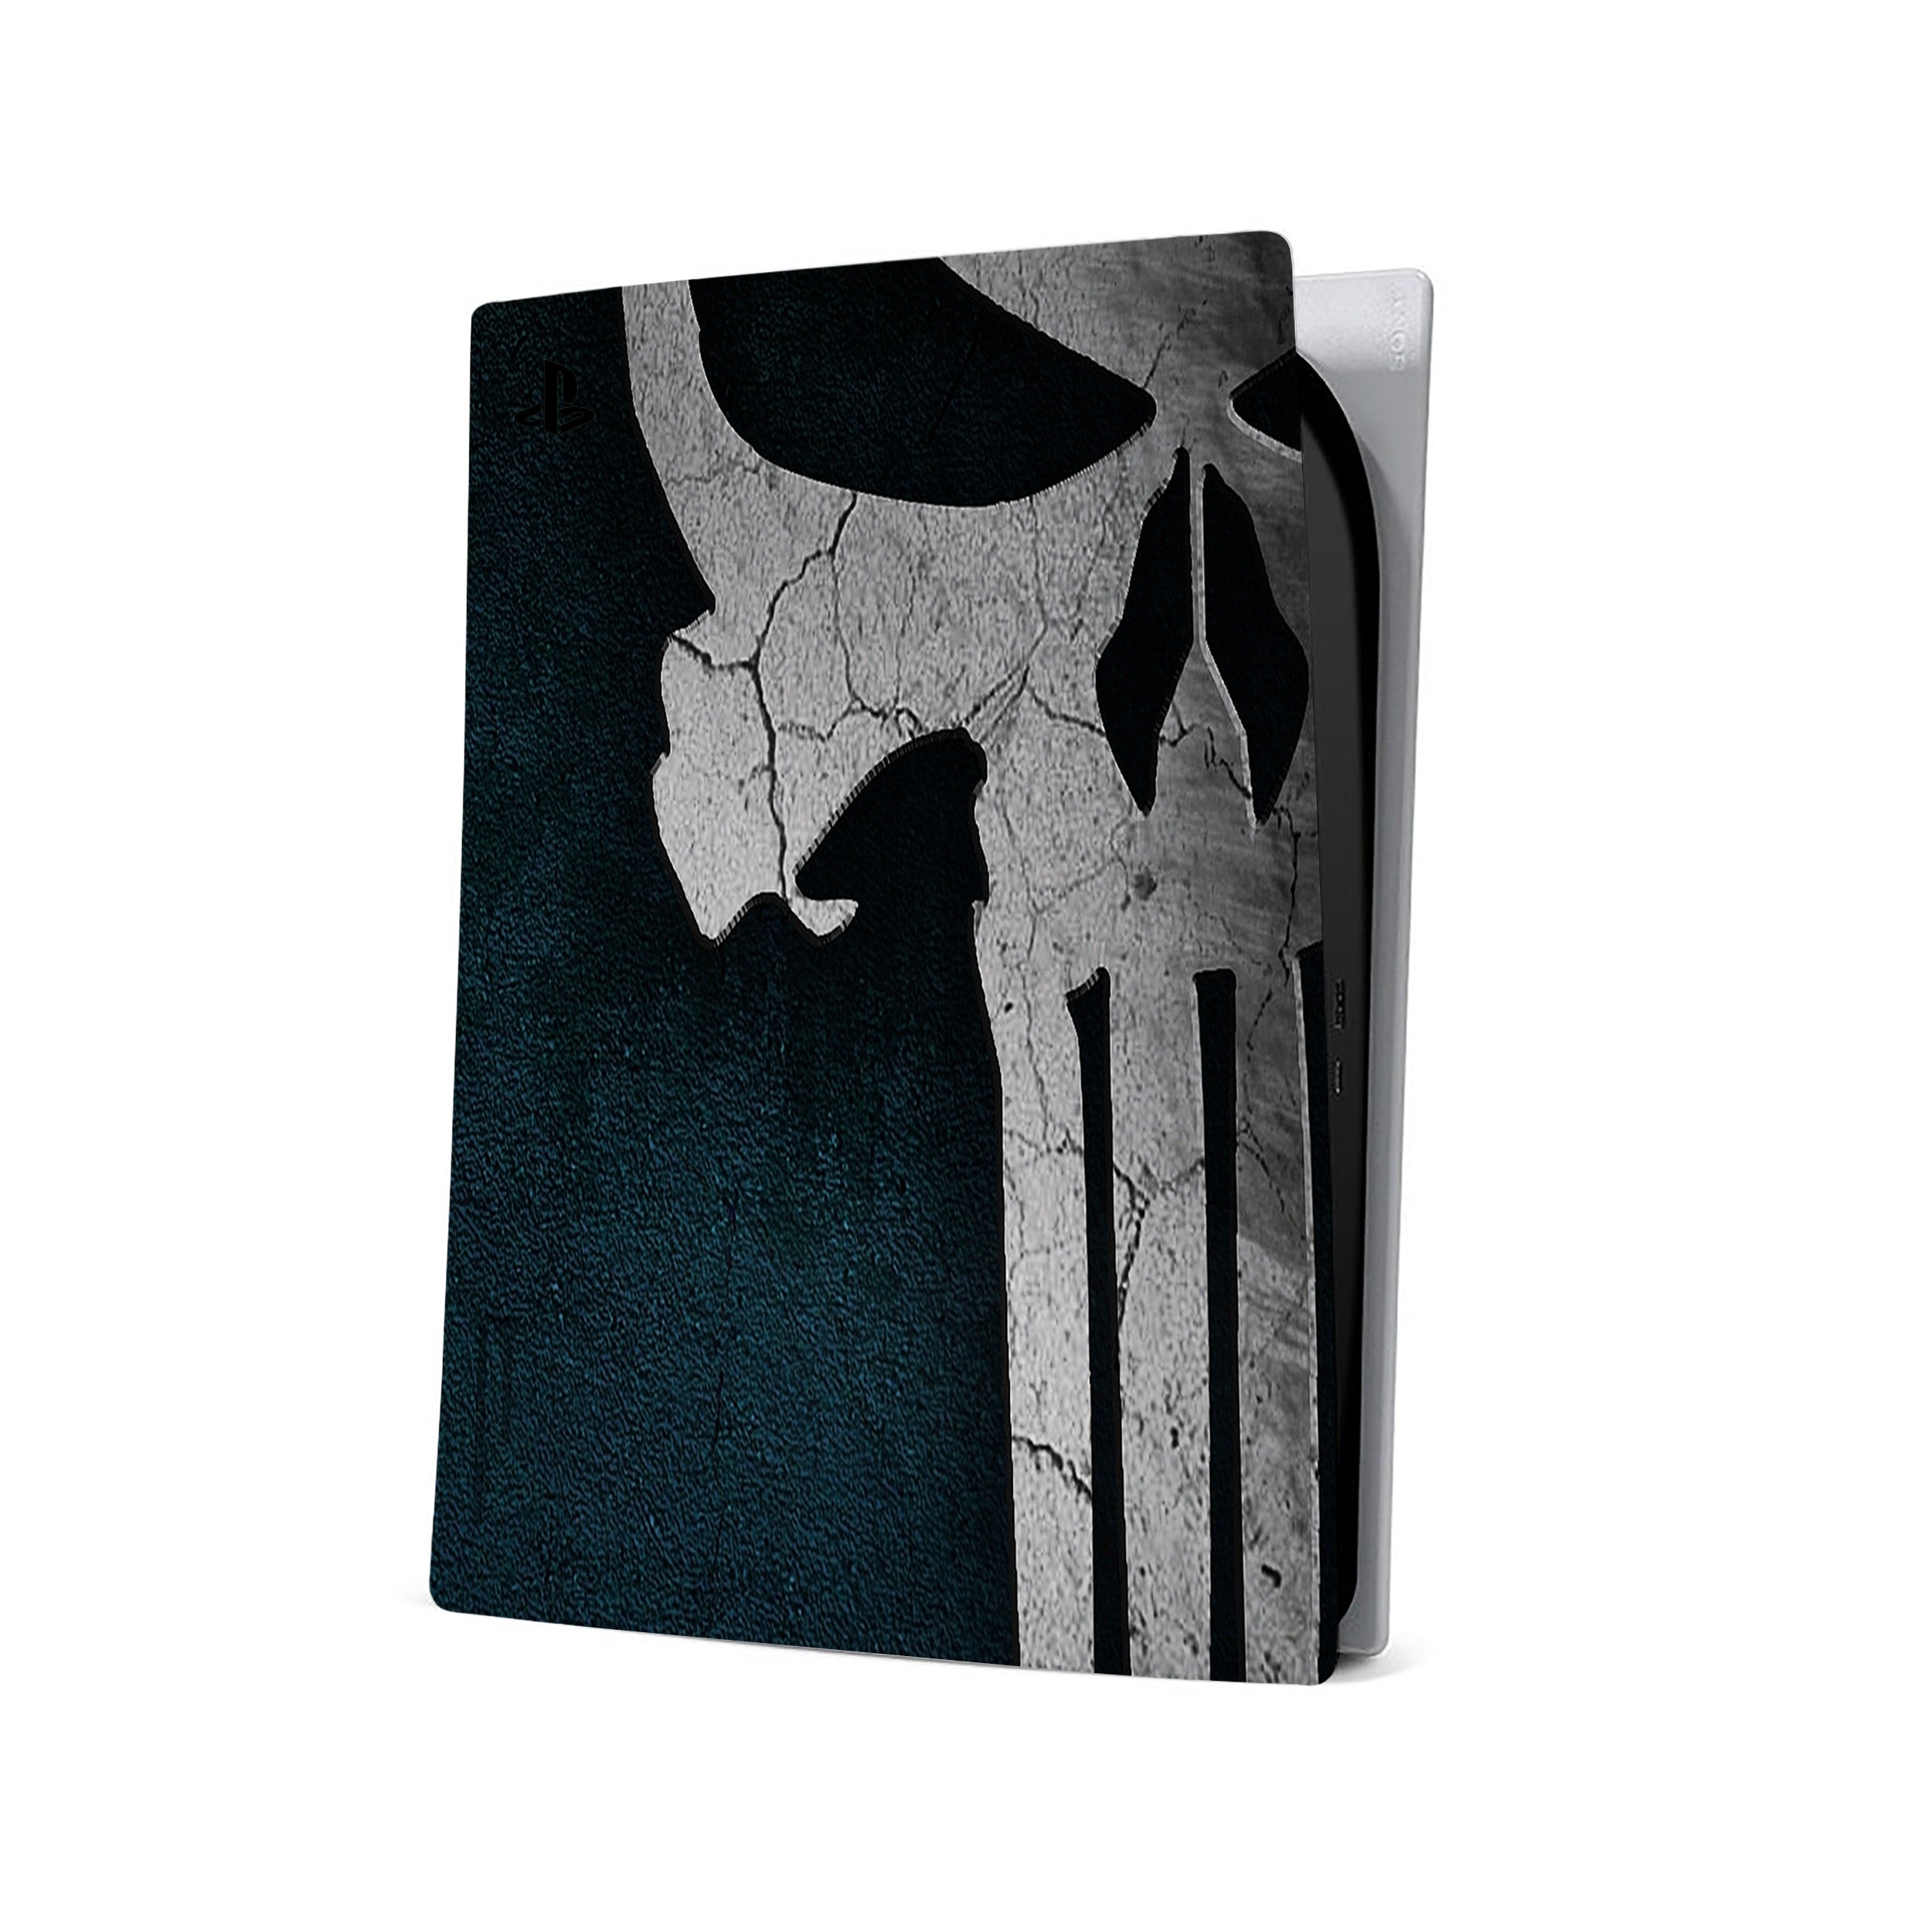 A video game skin featuring a Marvel The Punisher design for the PS5.